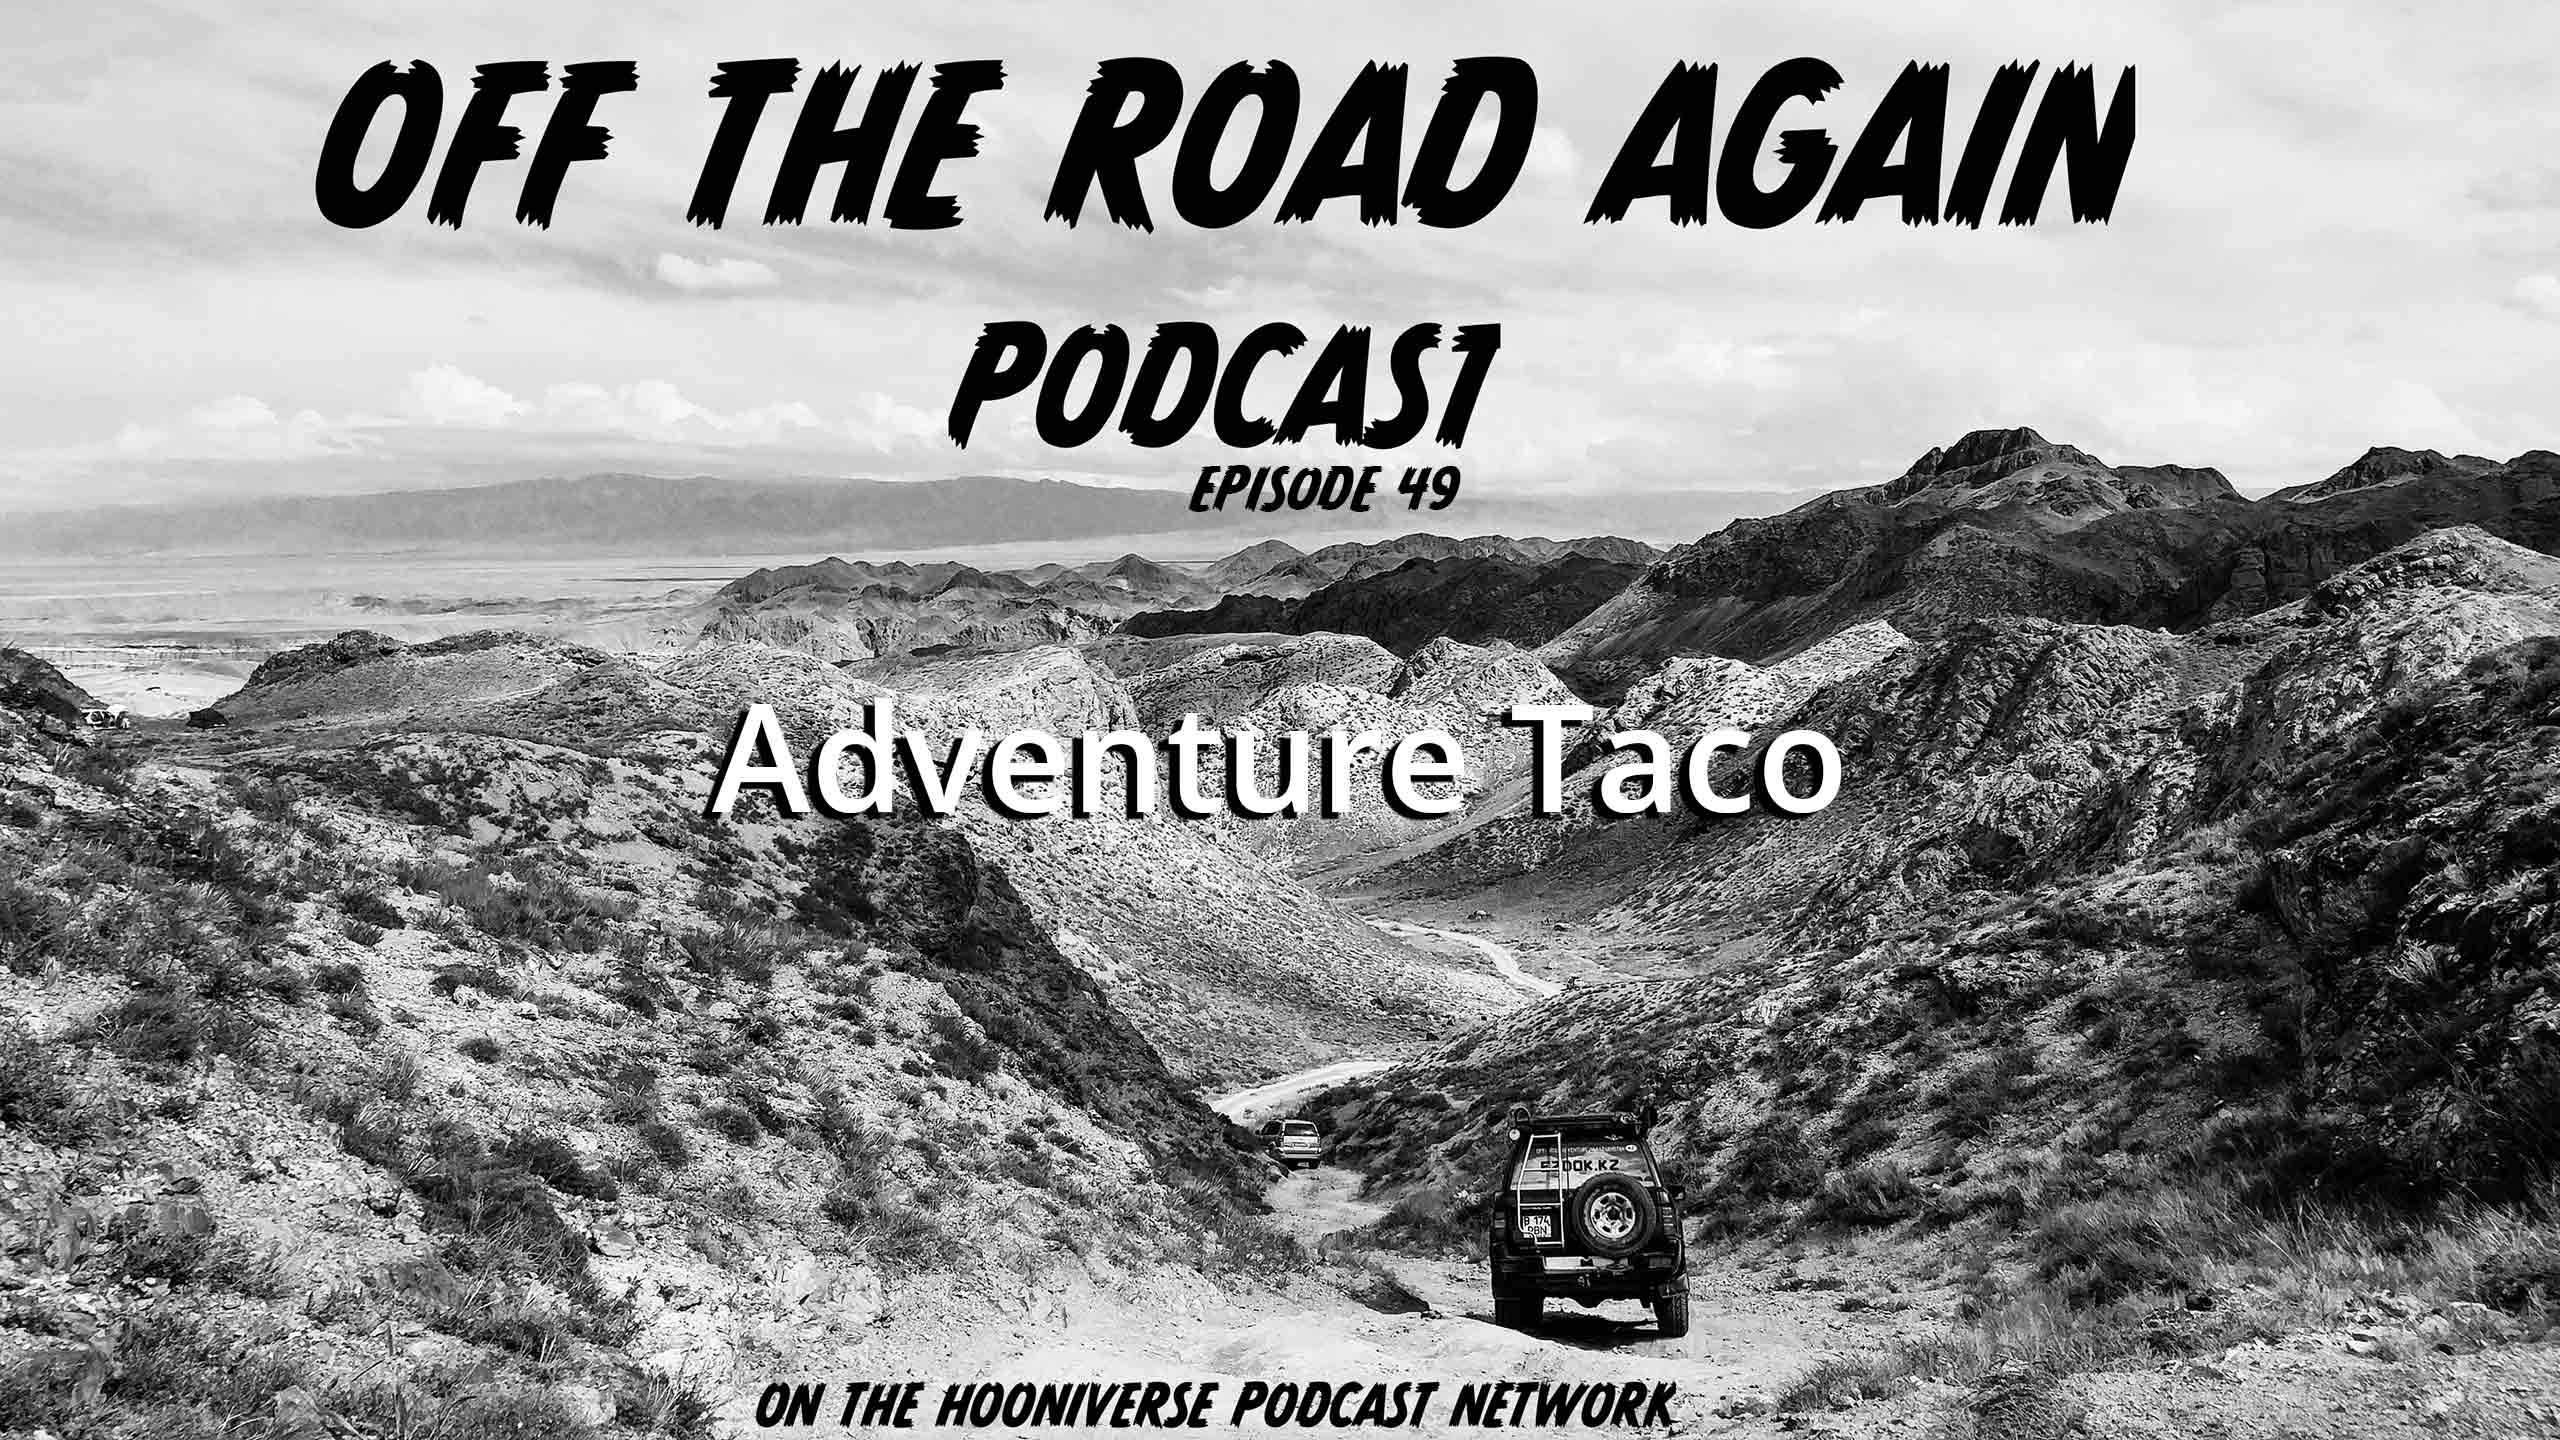 Adventure-Taco-Off-The-Road-Again-Podcast-Episode-49